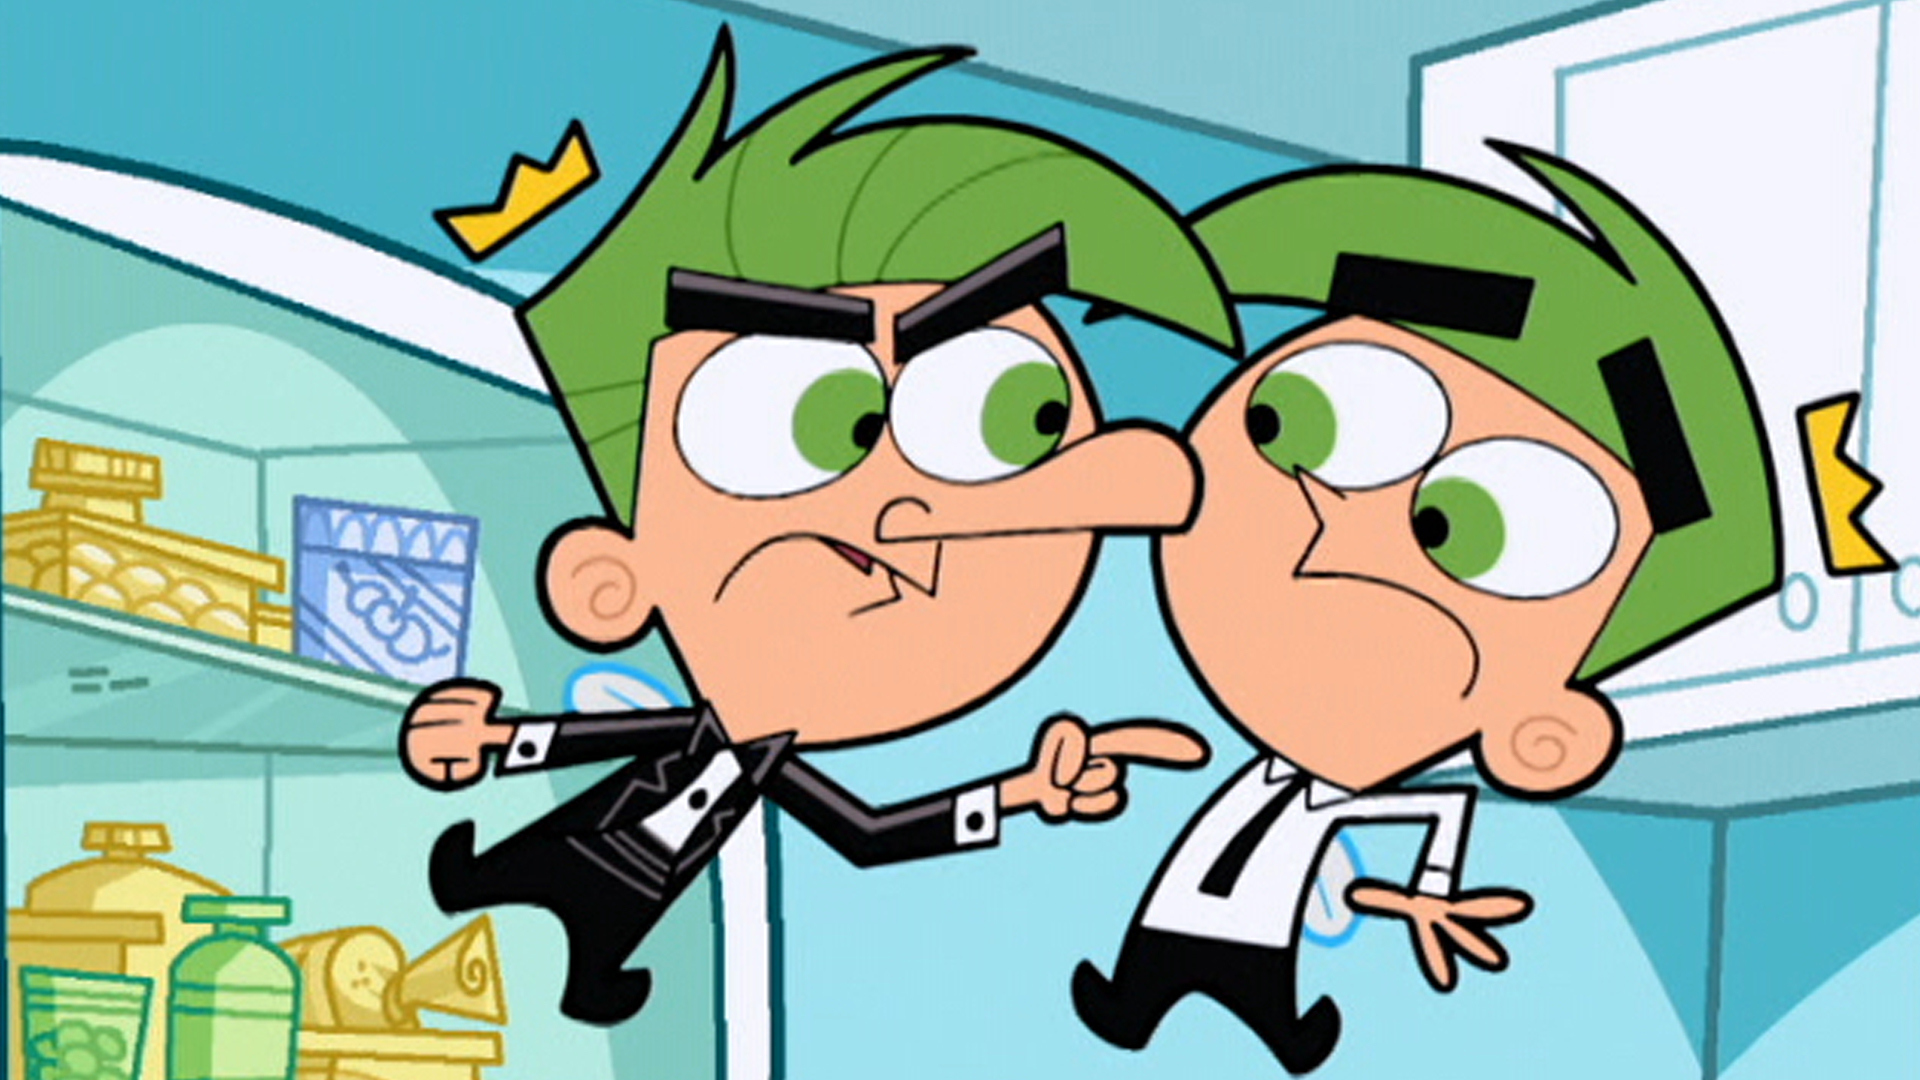 10. "The Fairly OddParents" - wide 7